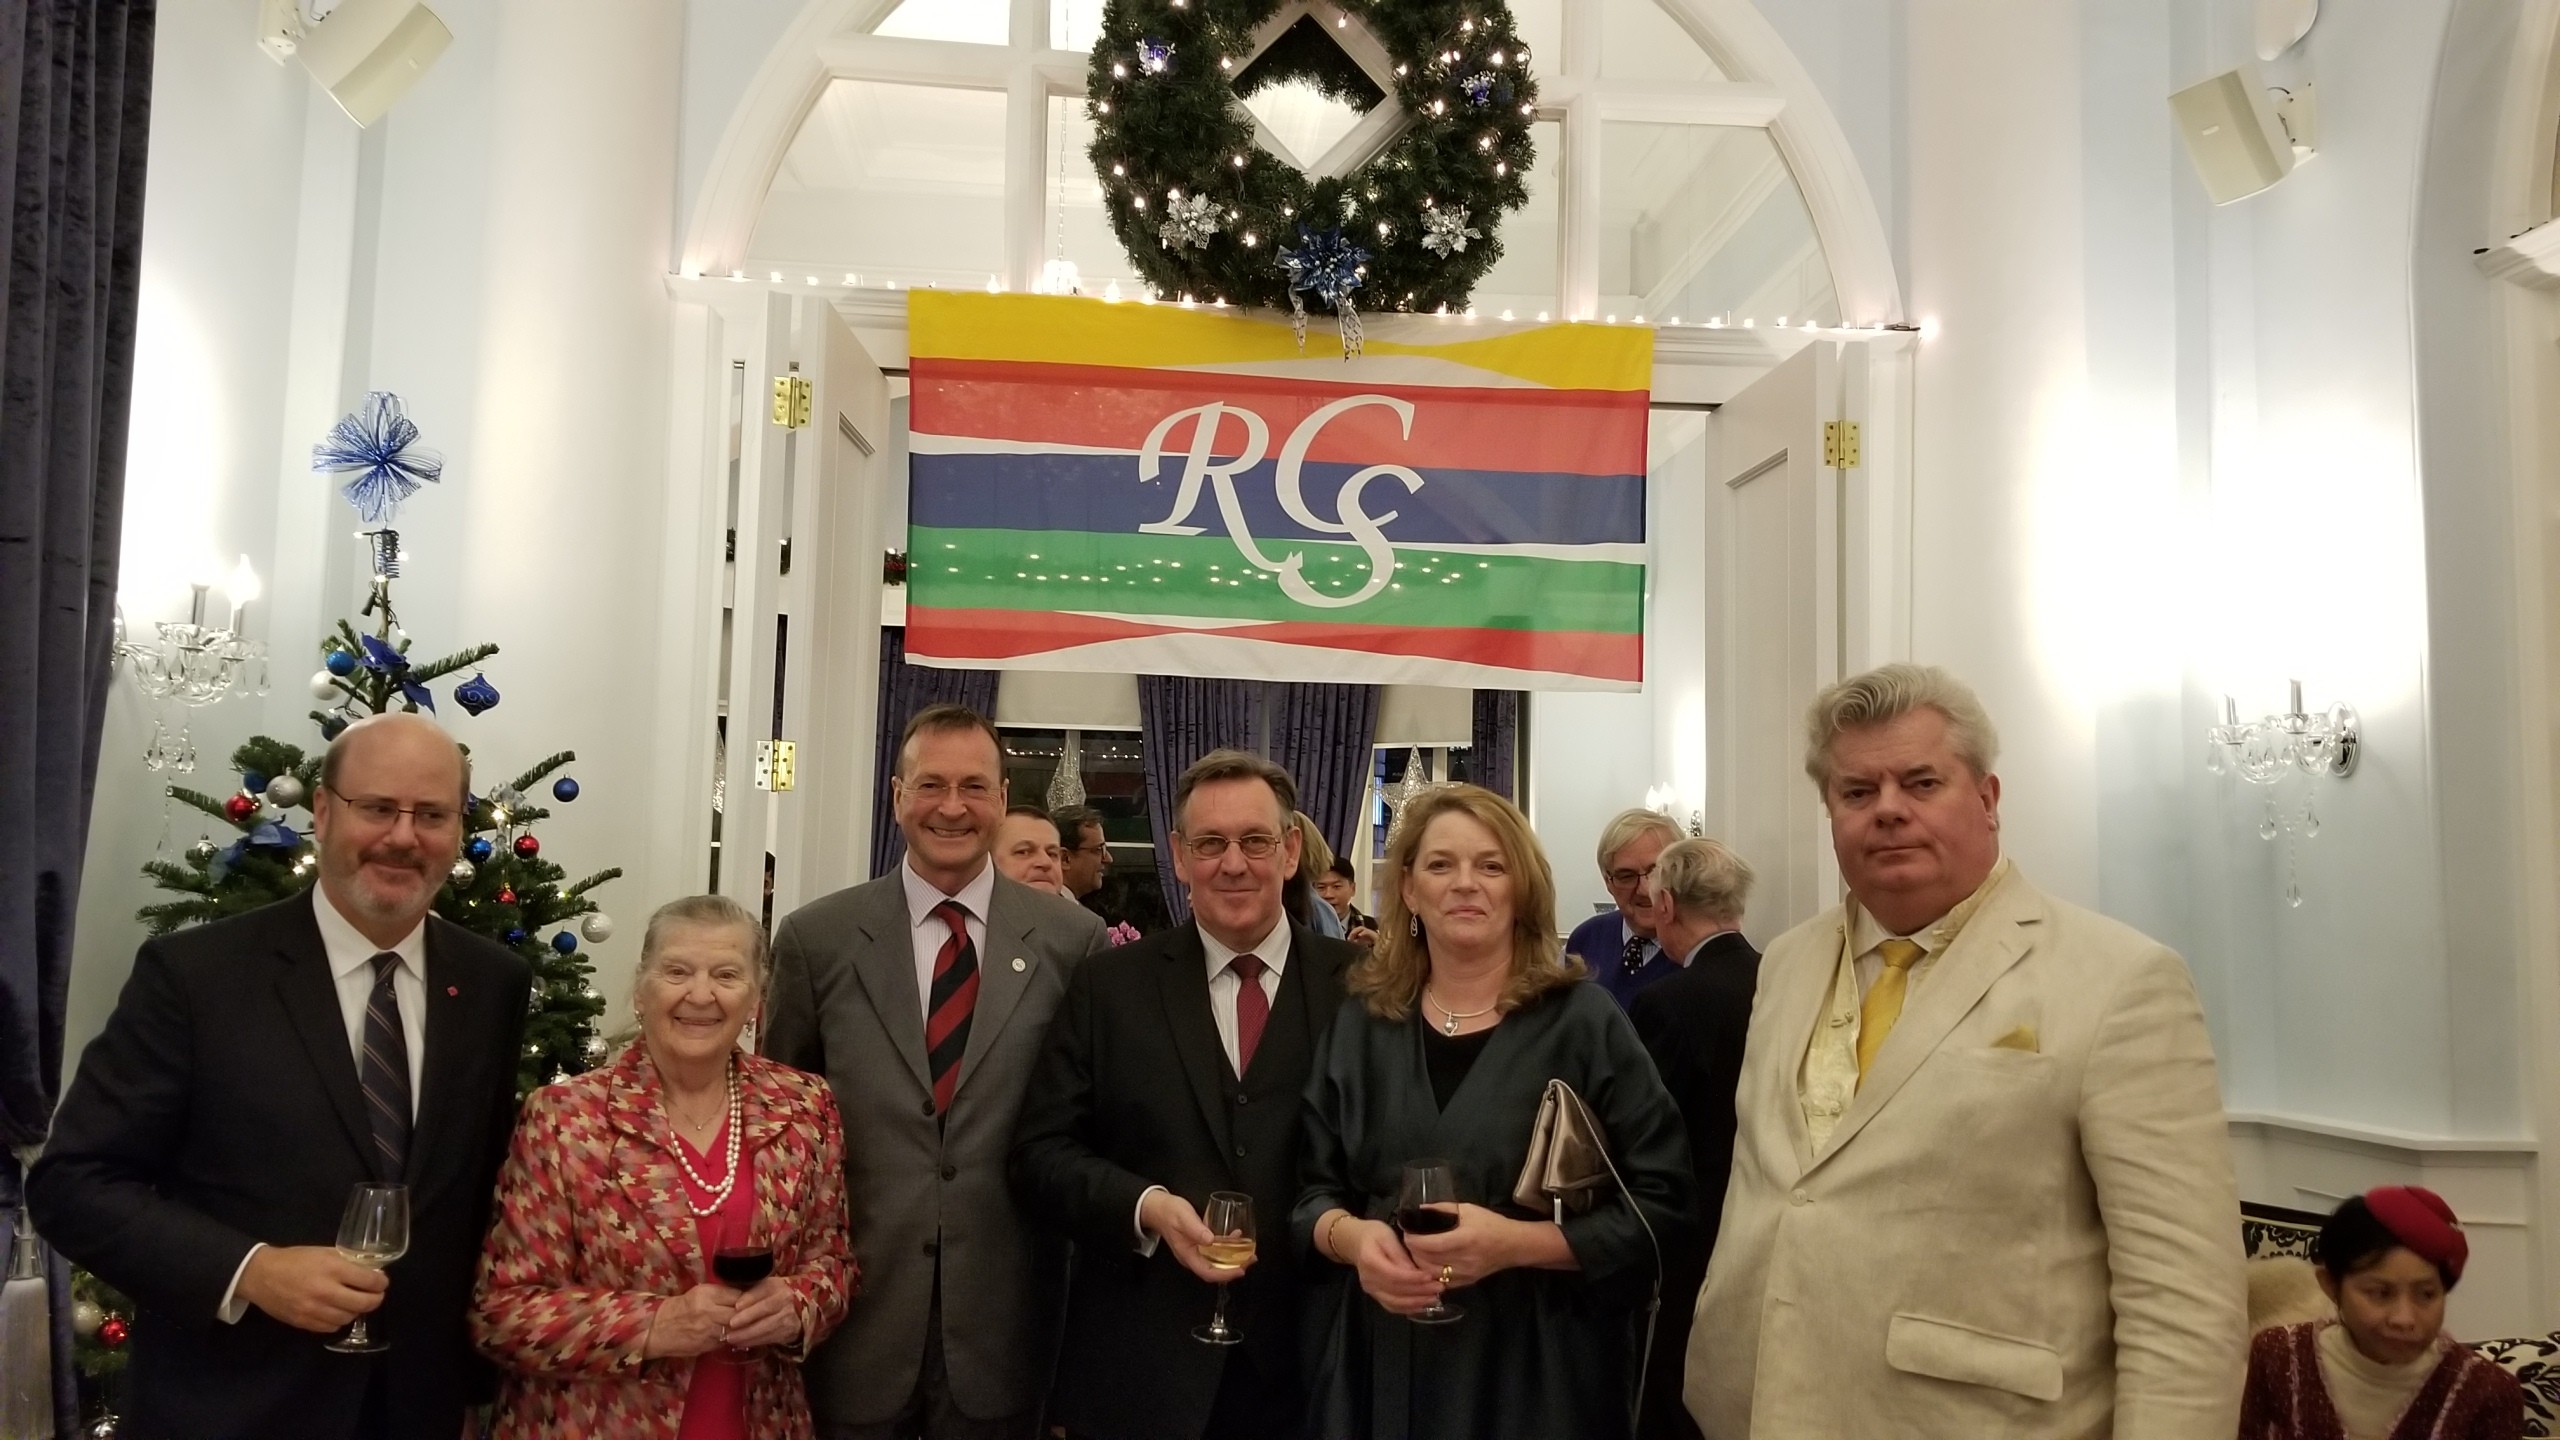 The Royal Commonwealth Society’s Hong Kong chairman Peter Mann (third from left) at a Christmas party held by the group last year. Photo: Handout